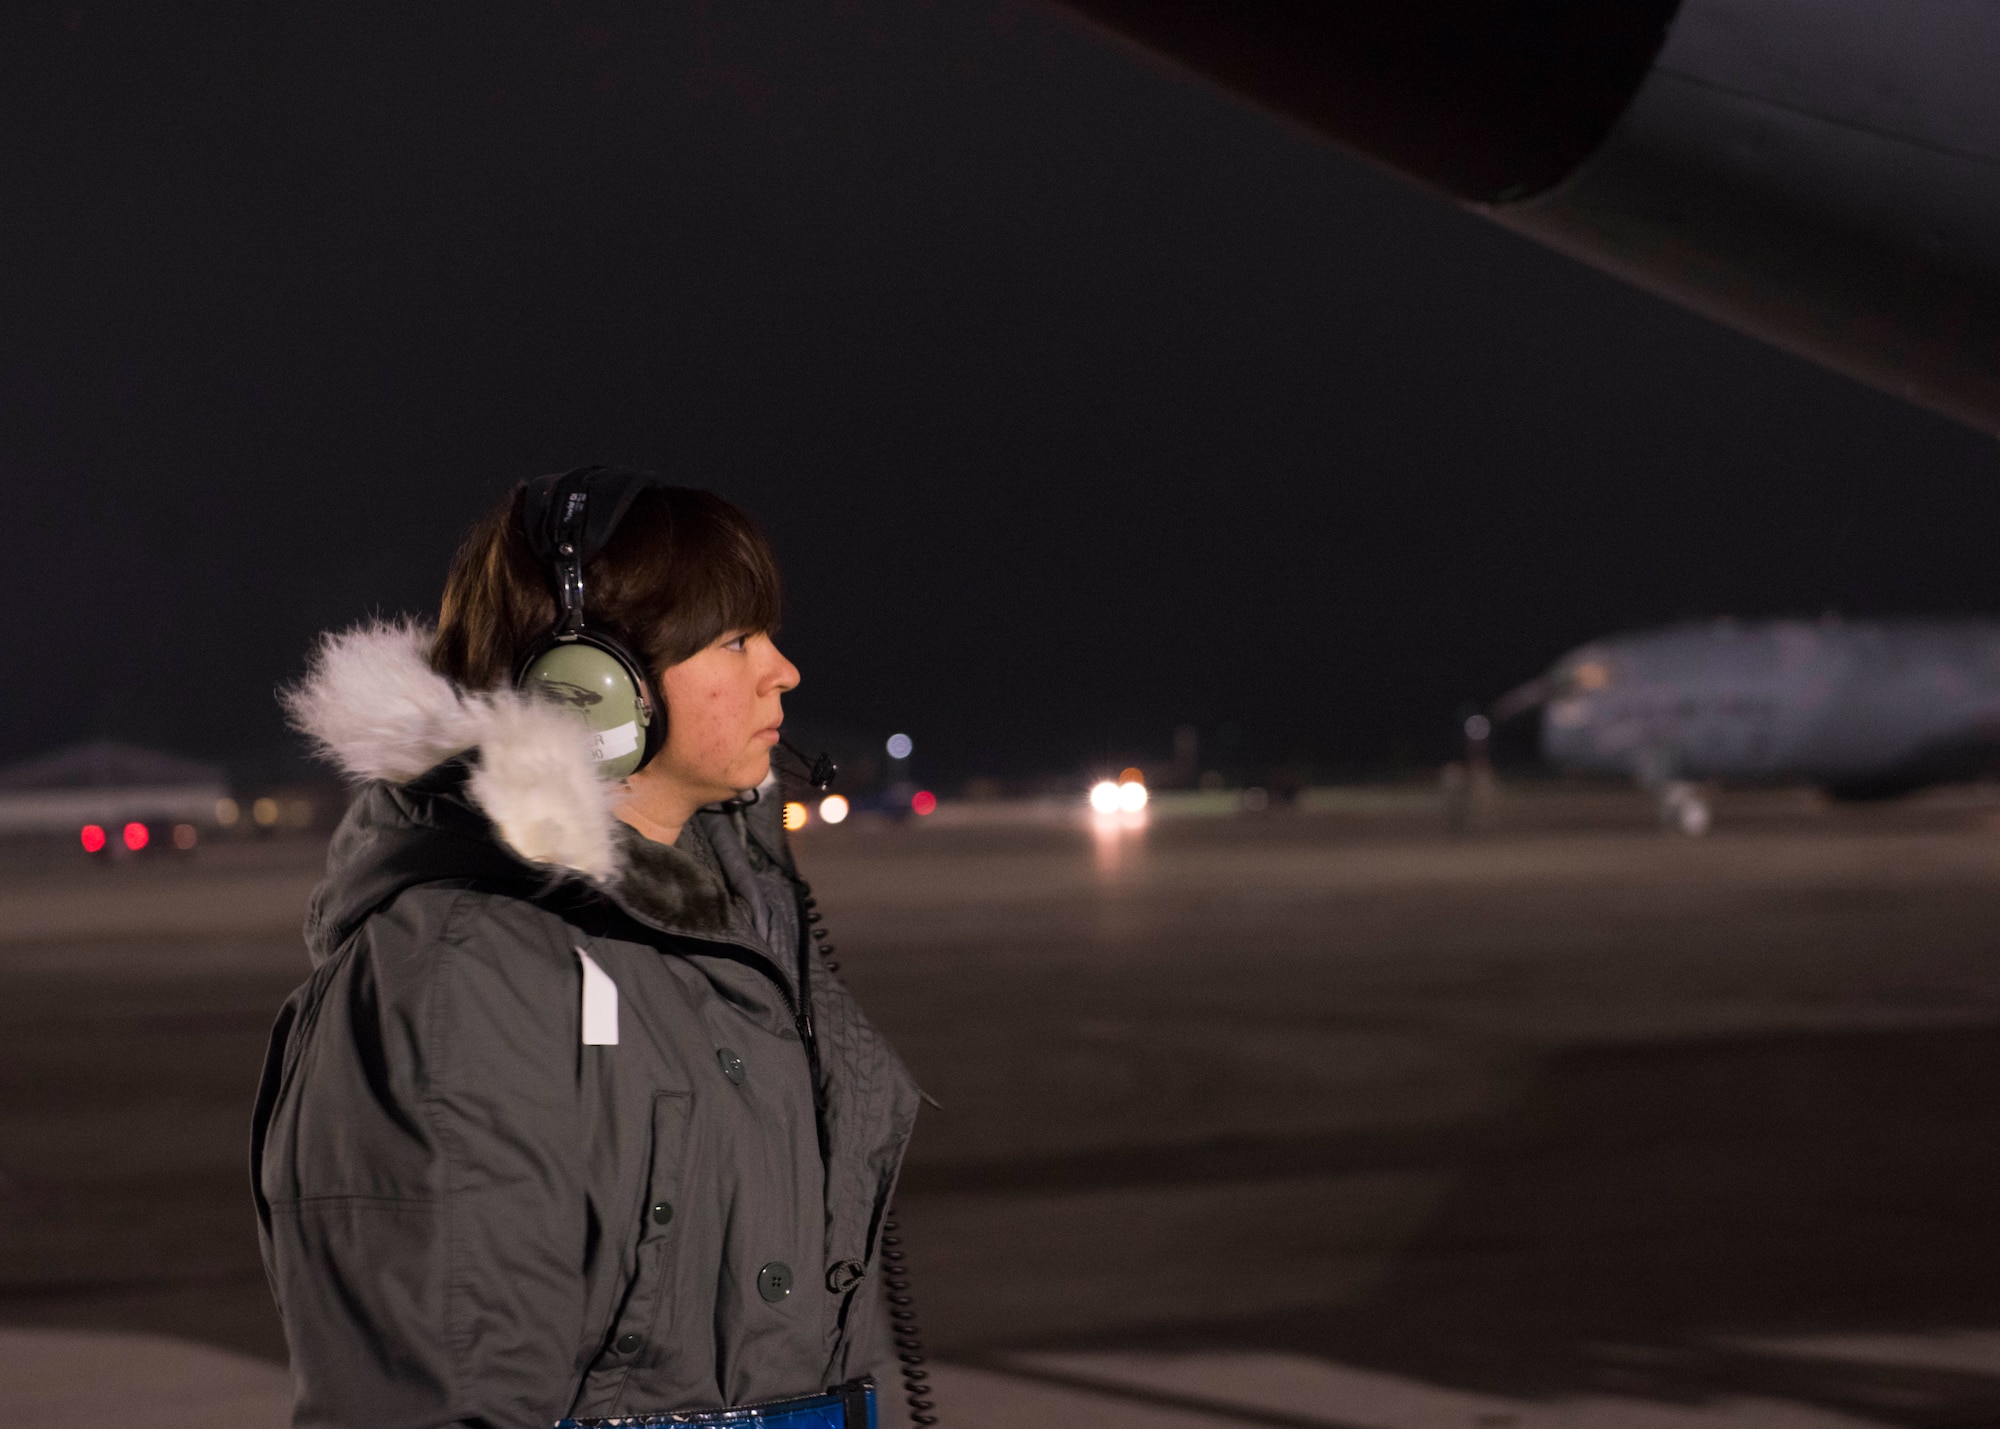 Senior Airman Megan Myers, 141st Maintenance Group crew chief, supervises KC-135 Stratotanker pre-flight checks during Exercise Global Thunder 2018 at Fairchild Air Force Base, Washington, Nov. 4, 2017. Global Thunder is an annual U.S. Strategic Command (USSTRATCOM) exercise designed to provide training opportunities to test and validate command, control and operational procedures. The training is based on a notional scenario developed to drive execution of USSTRATCOM and component forces’ ability to support the geographic combatant commands, deter adversaries and, if necessary, employ forces as directed by the President of the United States. (U.S. Air Force photo/Senior Airman Ryan Lackey)